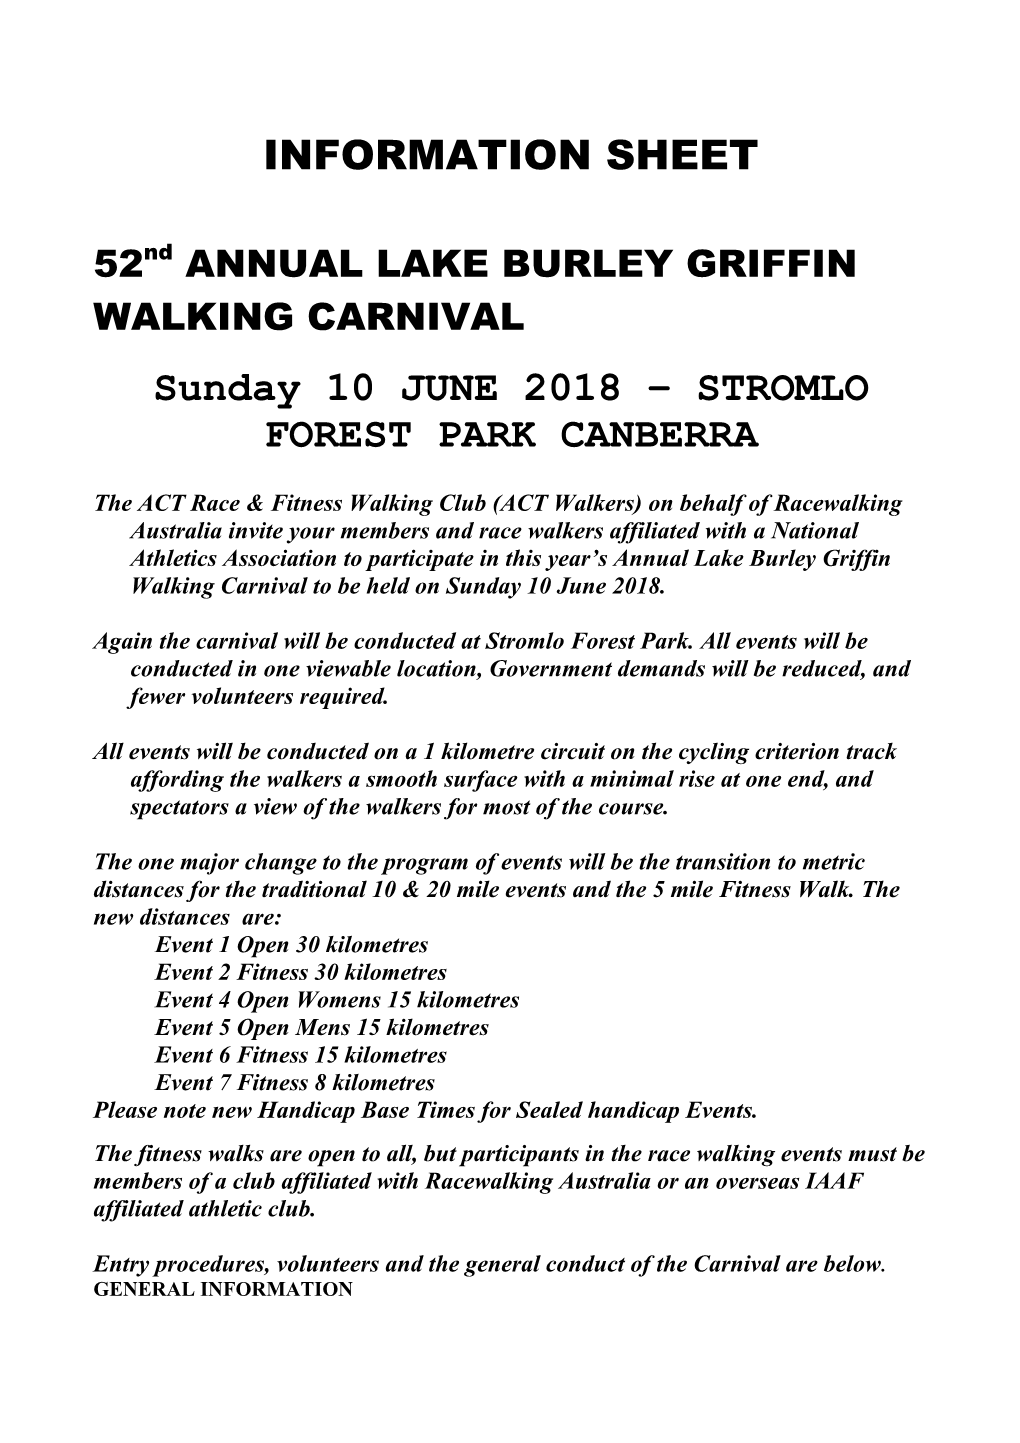 52Nd ANNUAL LAKE BURLEY GRIFFIN WALKING CARNIVAL